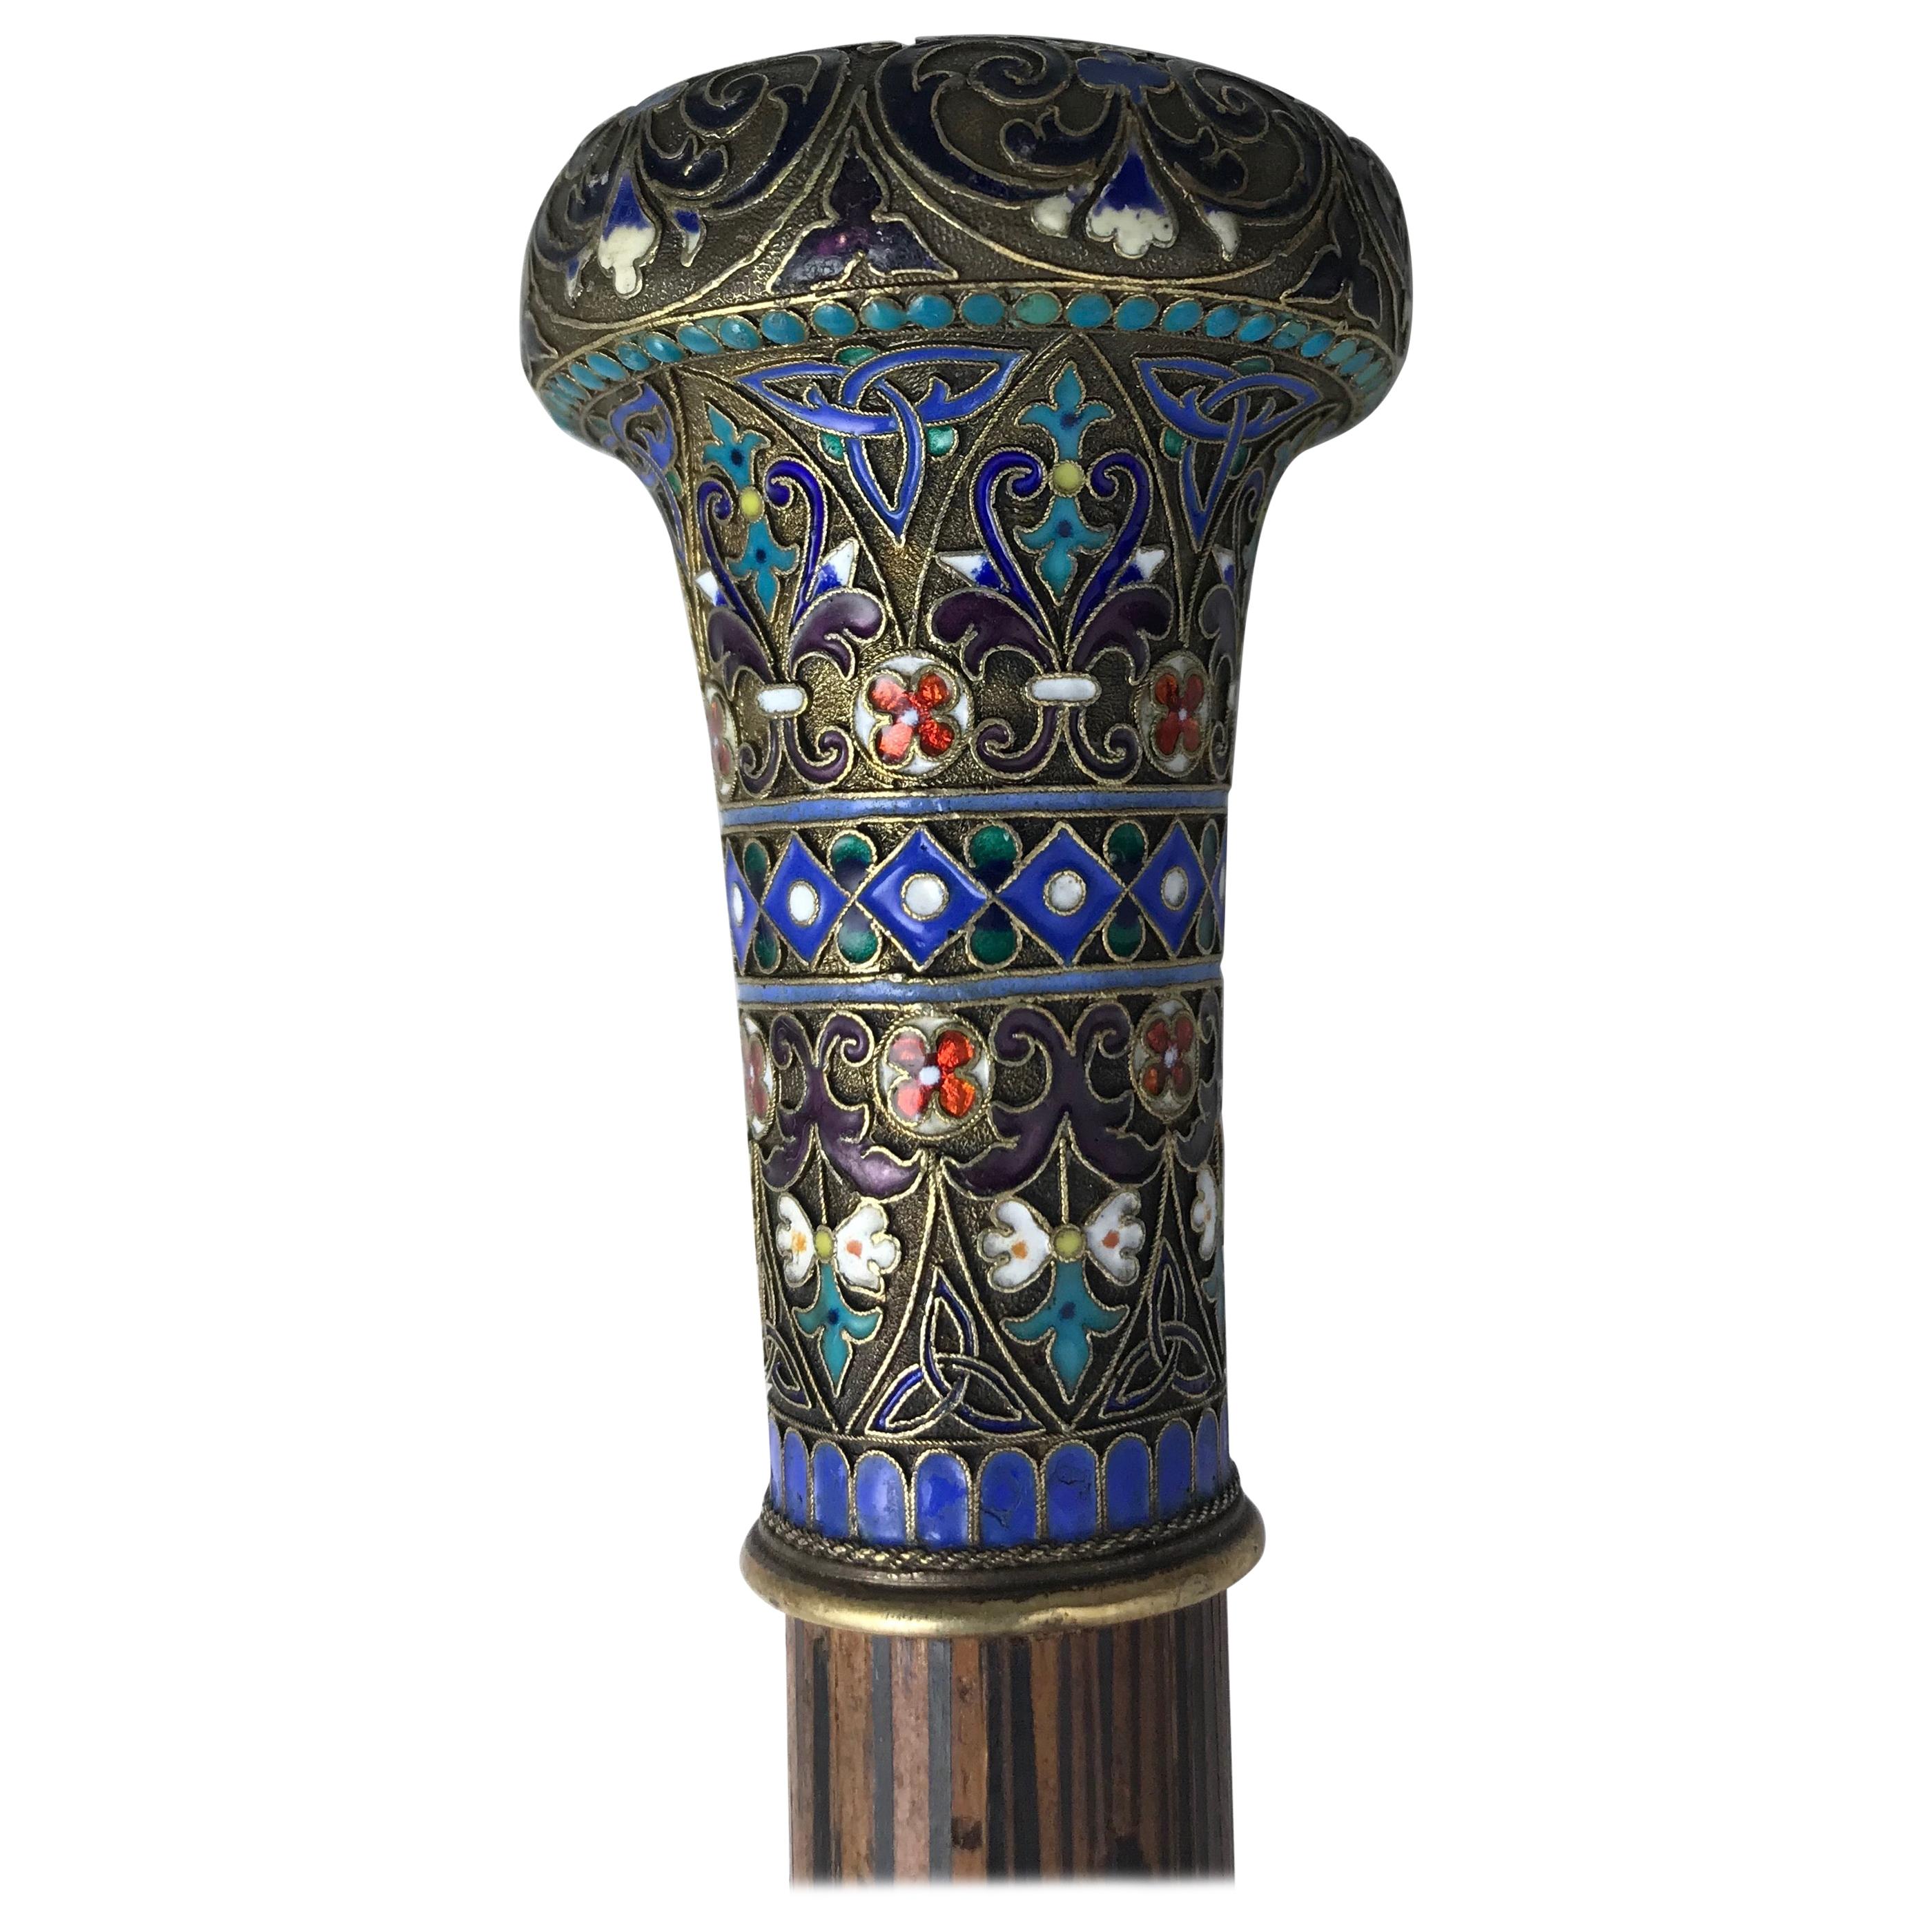 The capstan-shaped handle from the Romanov era, period of Tsar Nicholas II, decorated with vari-colored enamel scrolling foliage, florets, beaded and geometric motifs on silver, attached to a later tapered stick. 

Moscow, late 19th century,